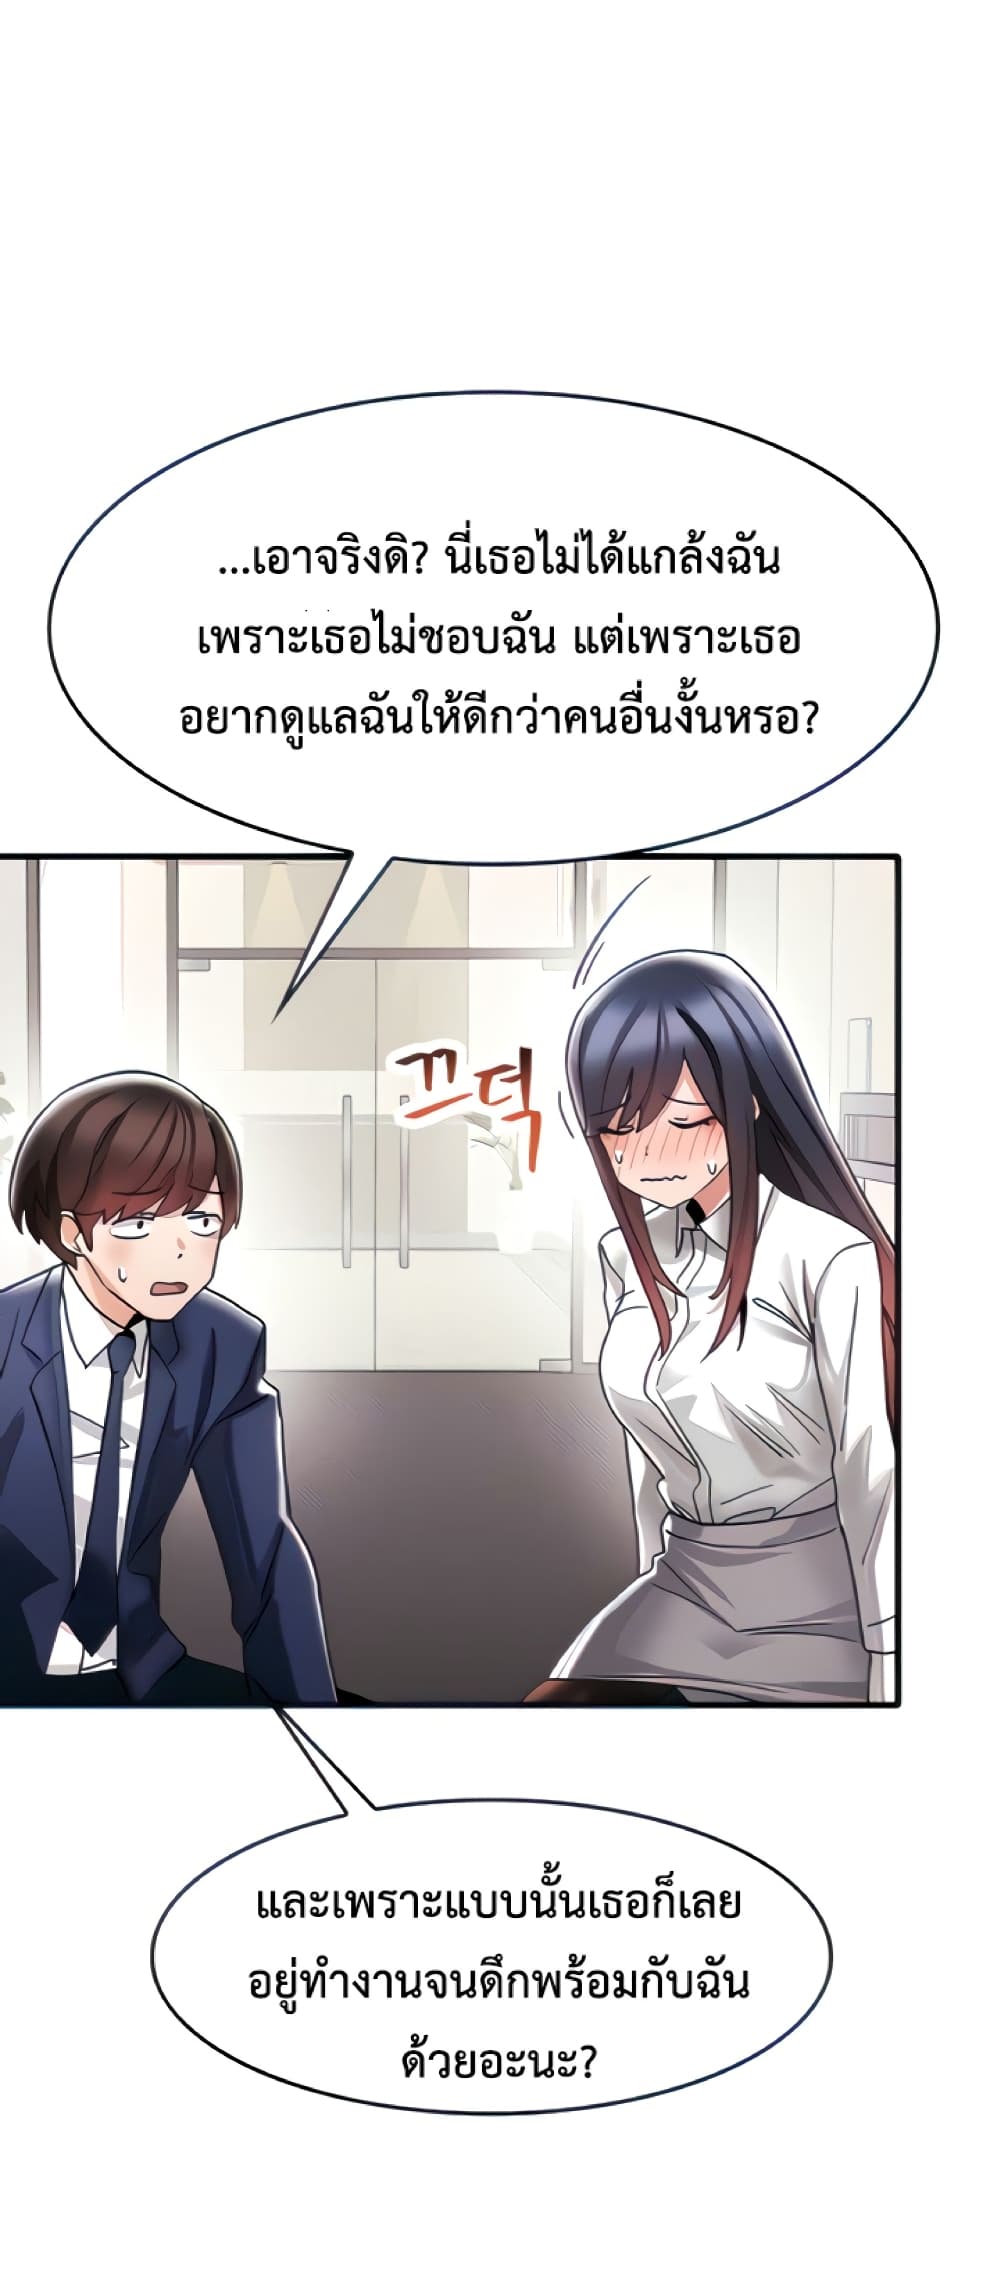 Relationship Reverse Button: Let’s Make Her Submissive 7 ภาพที่ 7